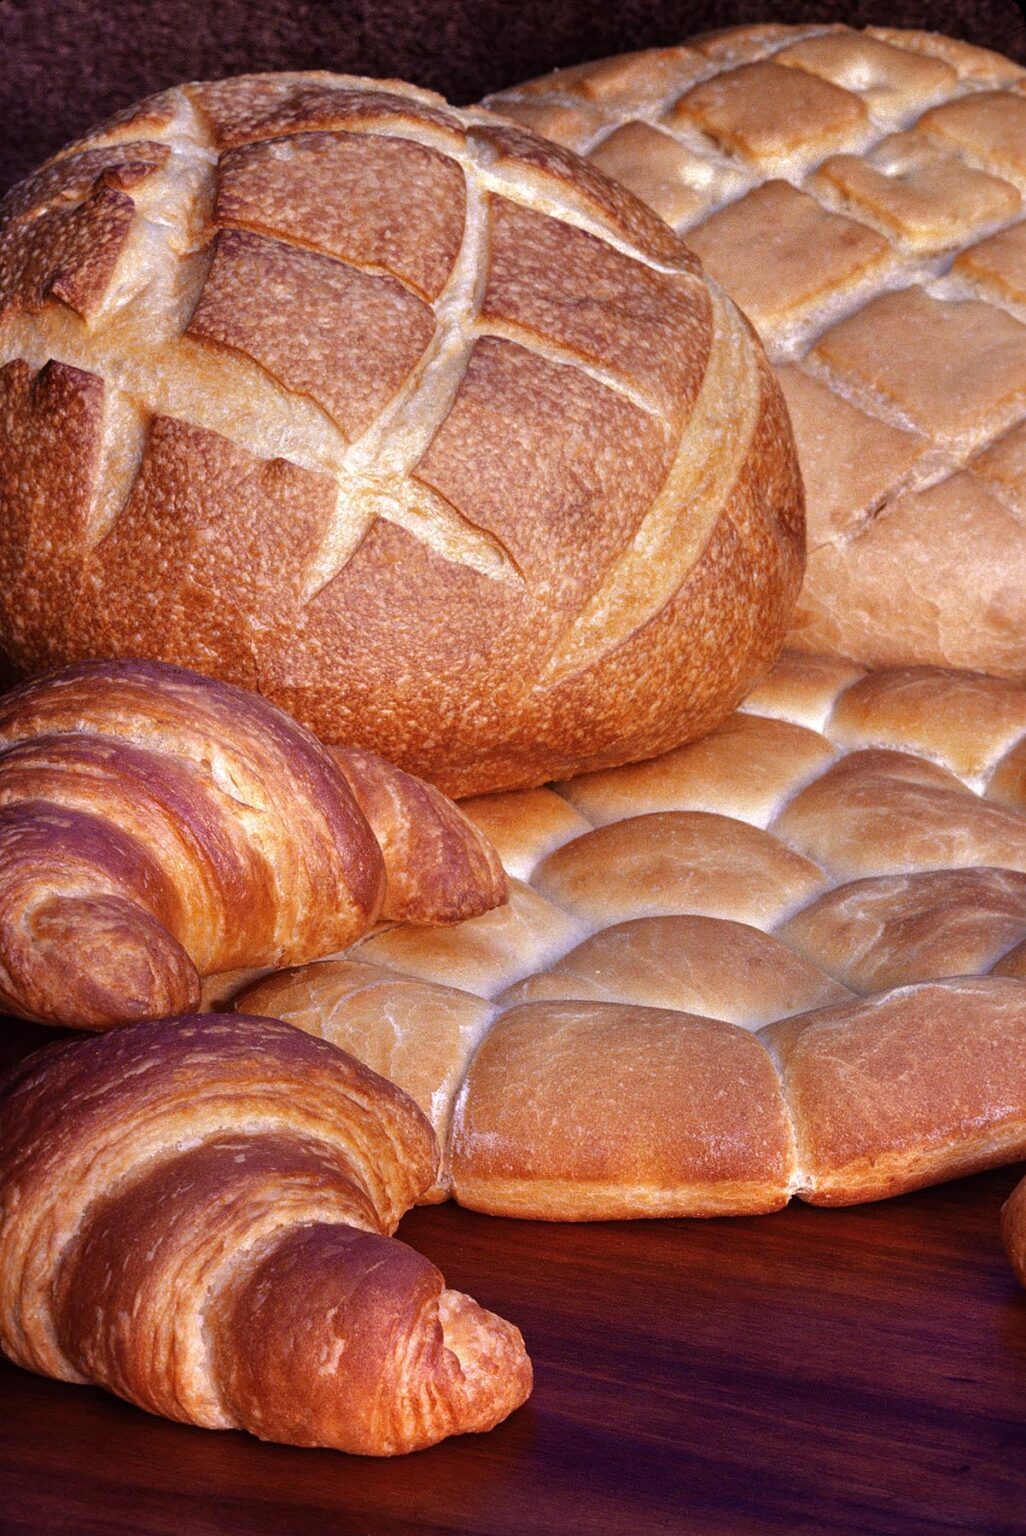 A variety of breads and croissant